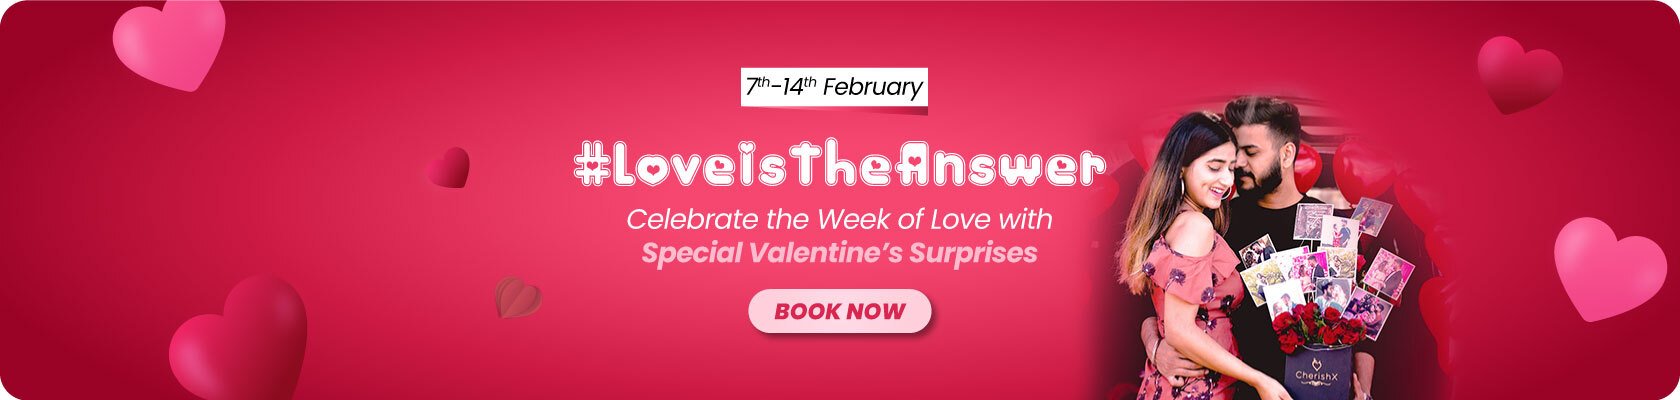 Celebrate the week of love with Special Valentine's Surprises